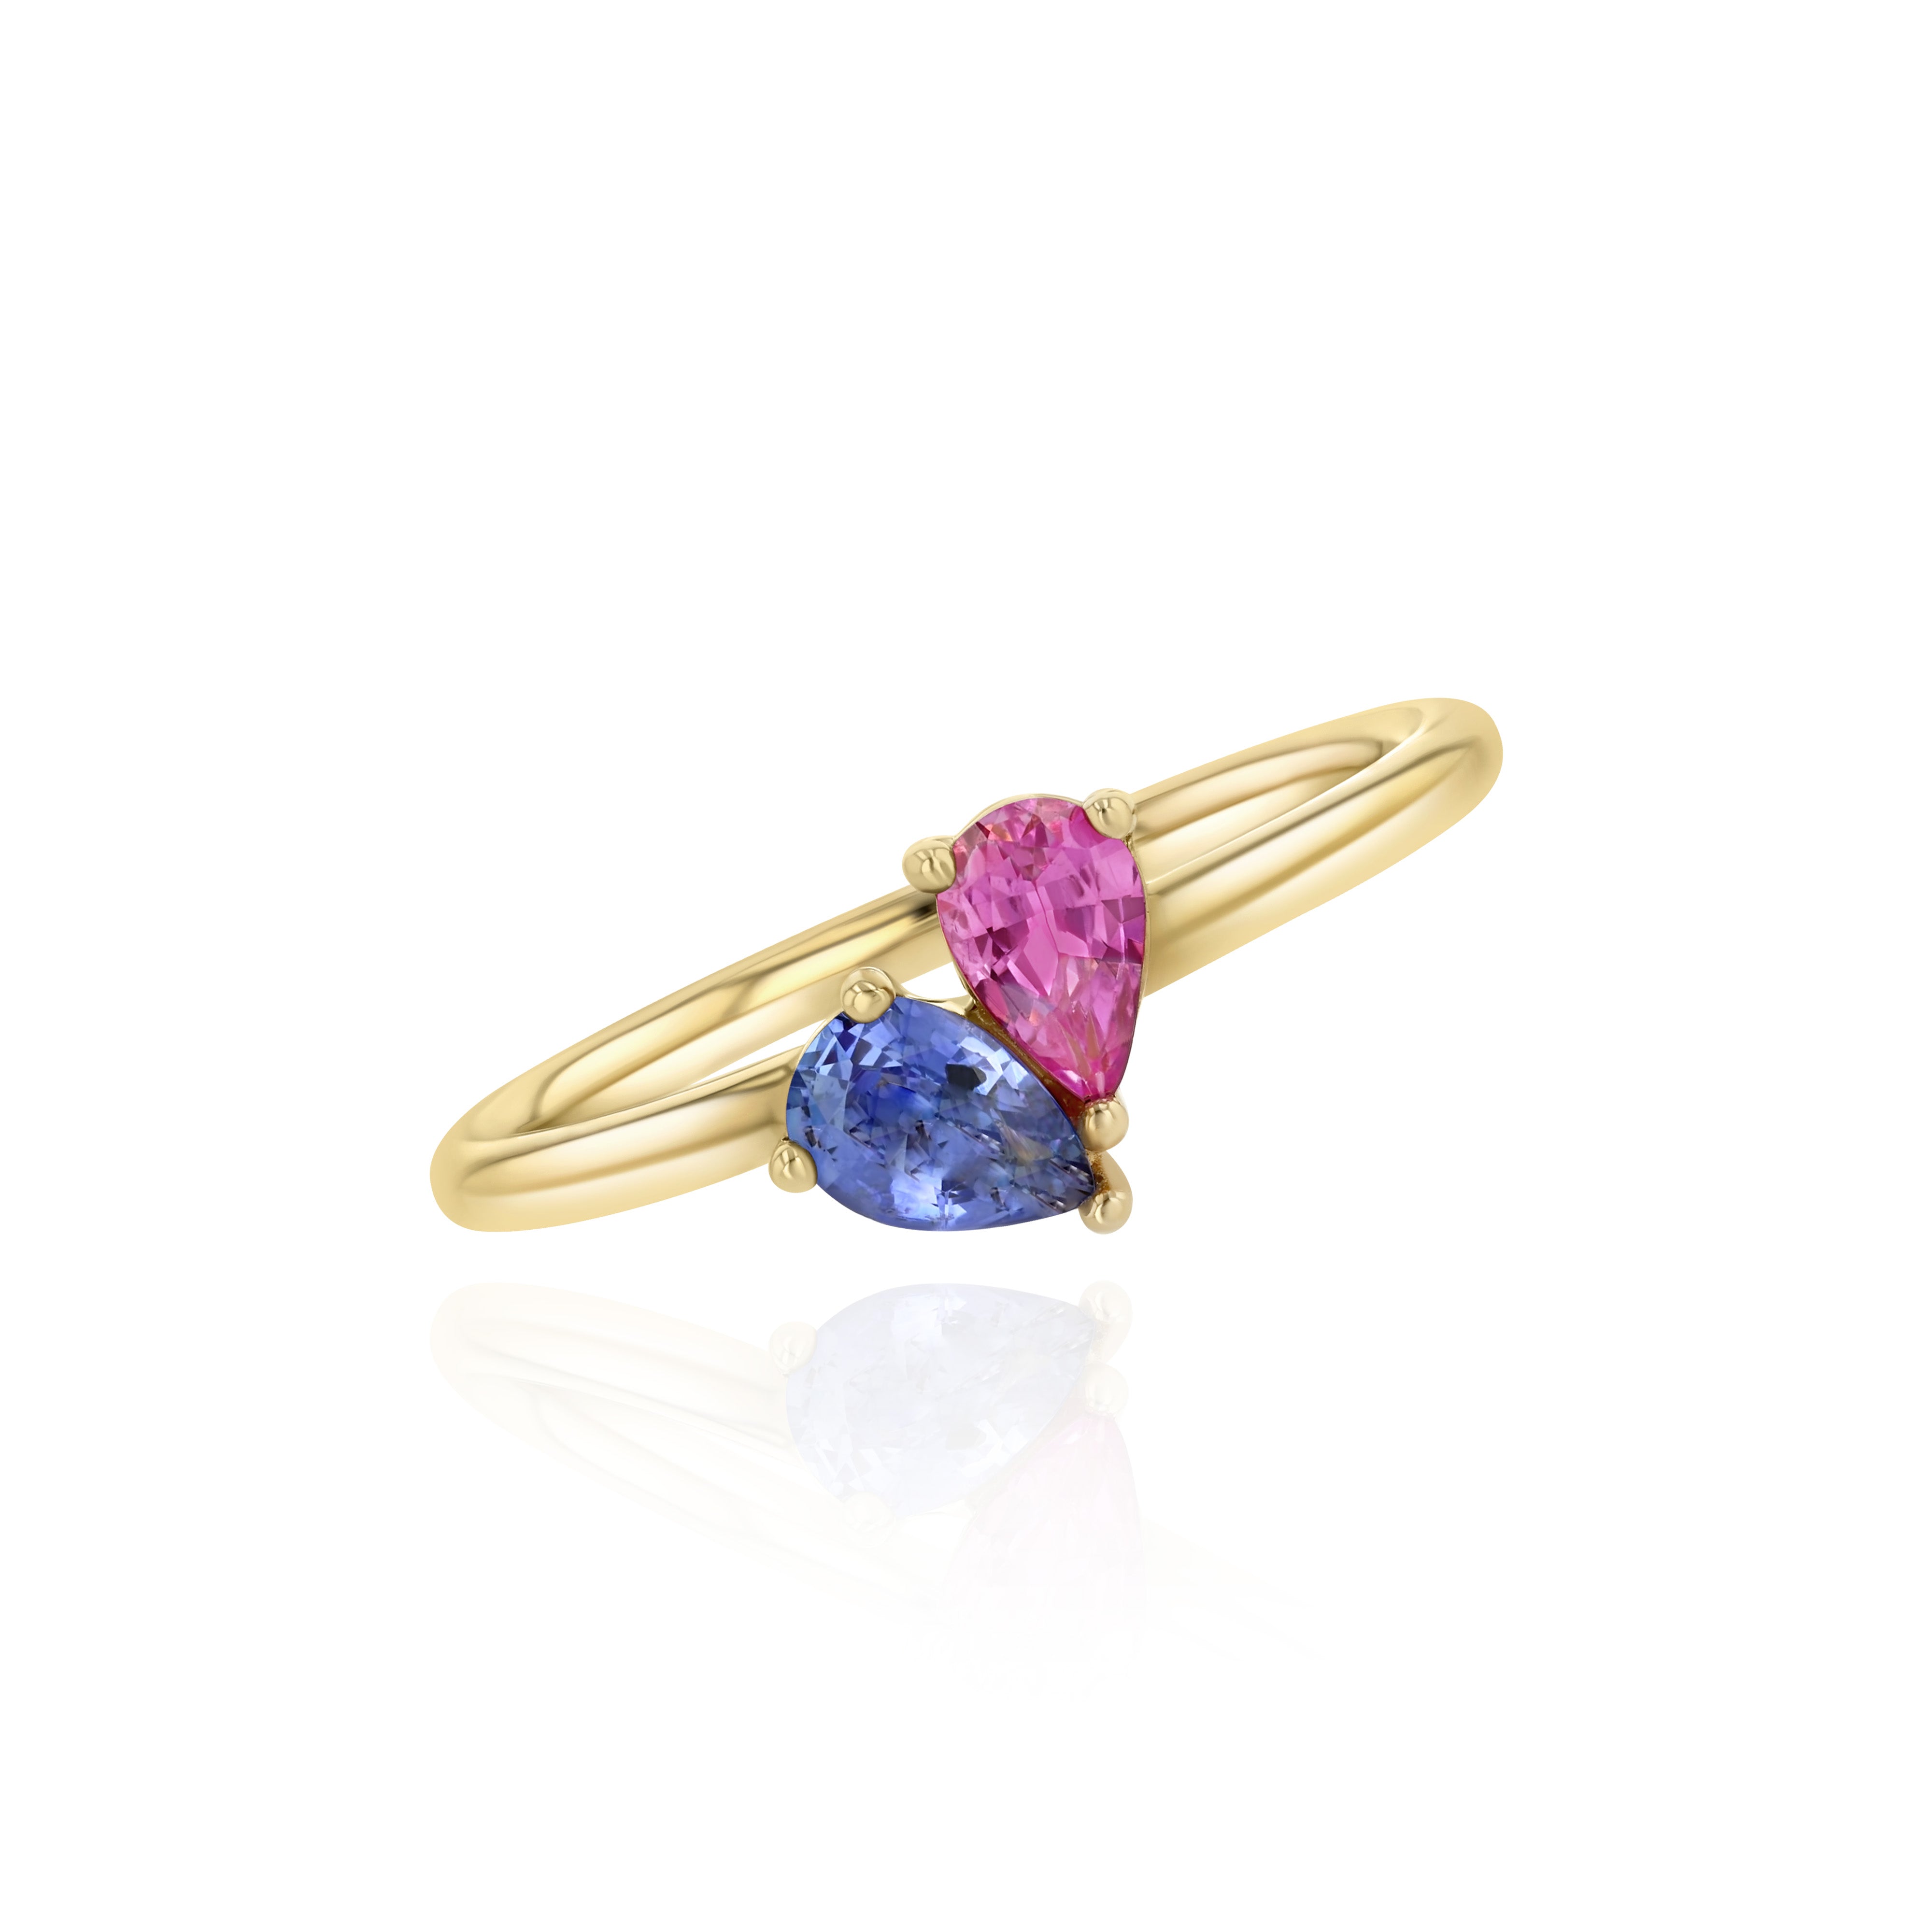 Yellow Gold ring with pear shaped Pink Sapphire and Tanzanite, Small